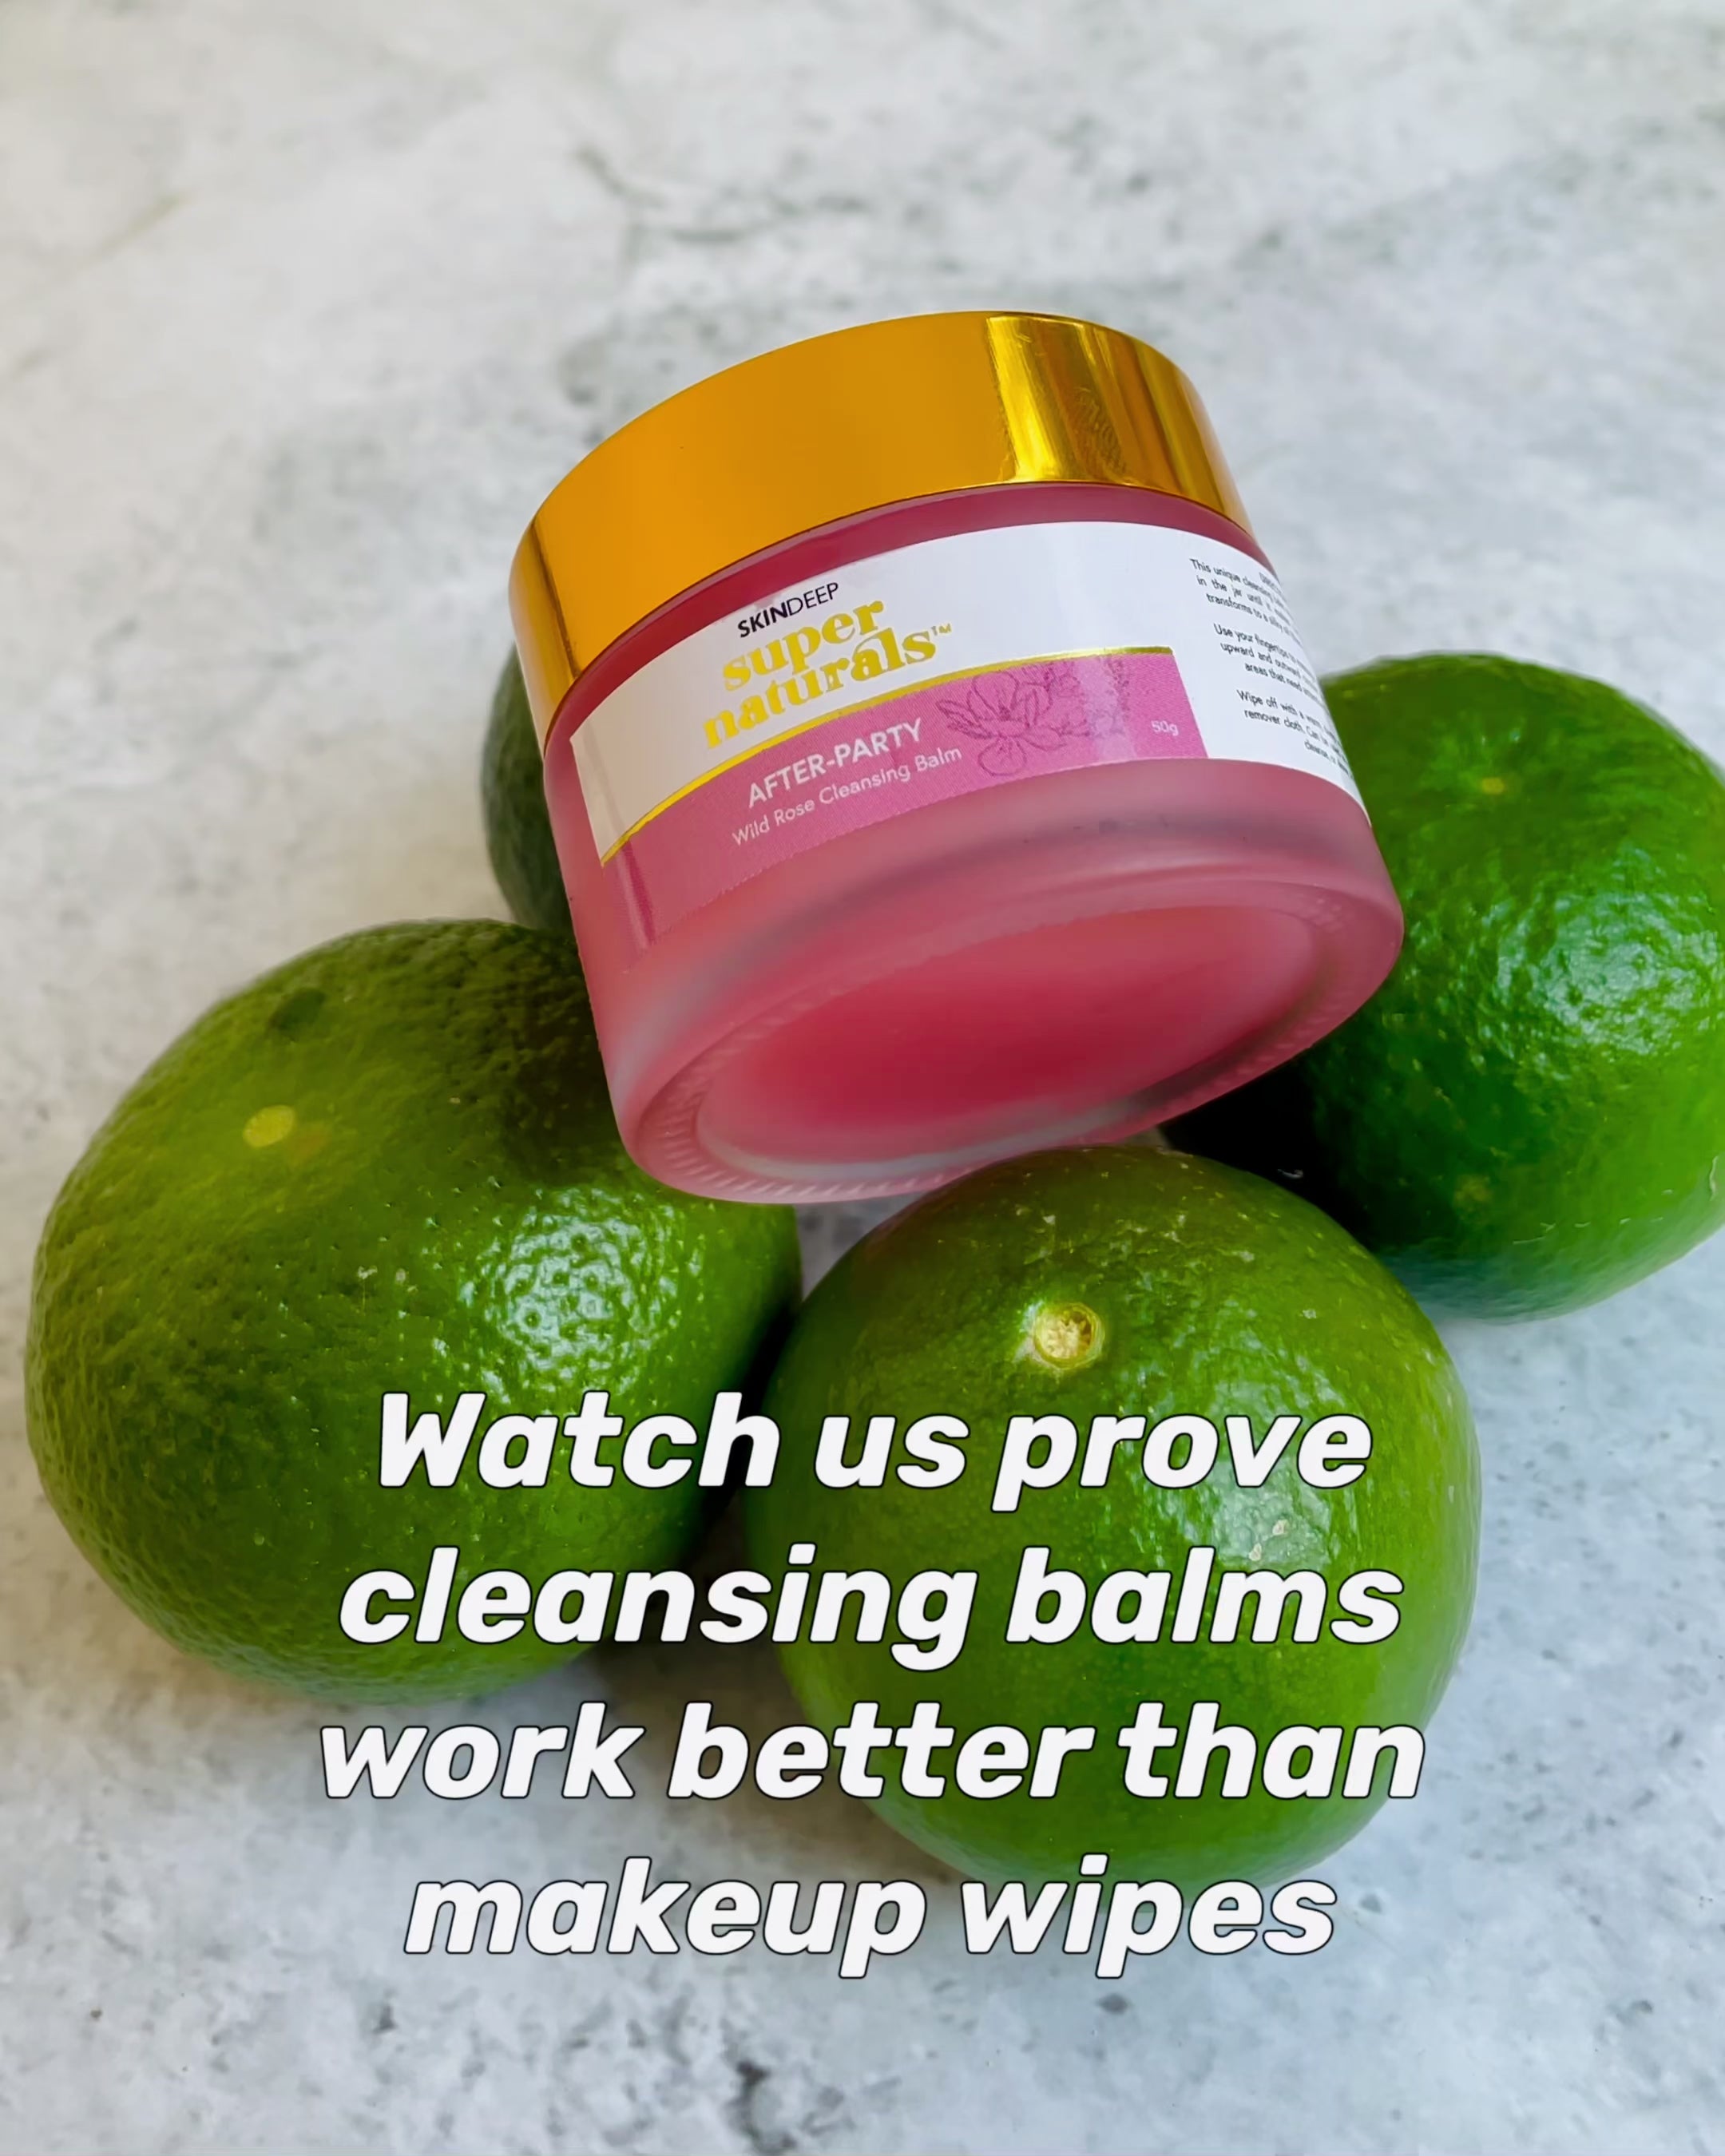 AFTER-PARTY - Wild Rose Cleansing Balm